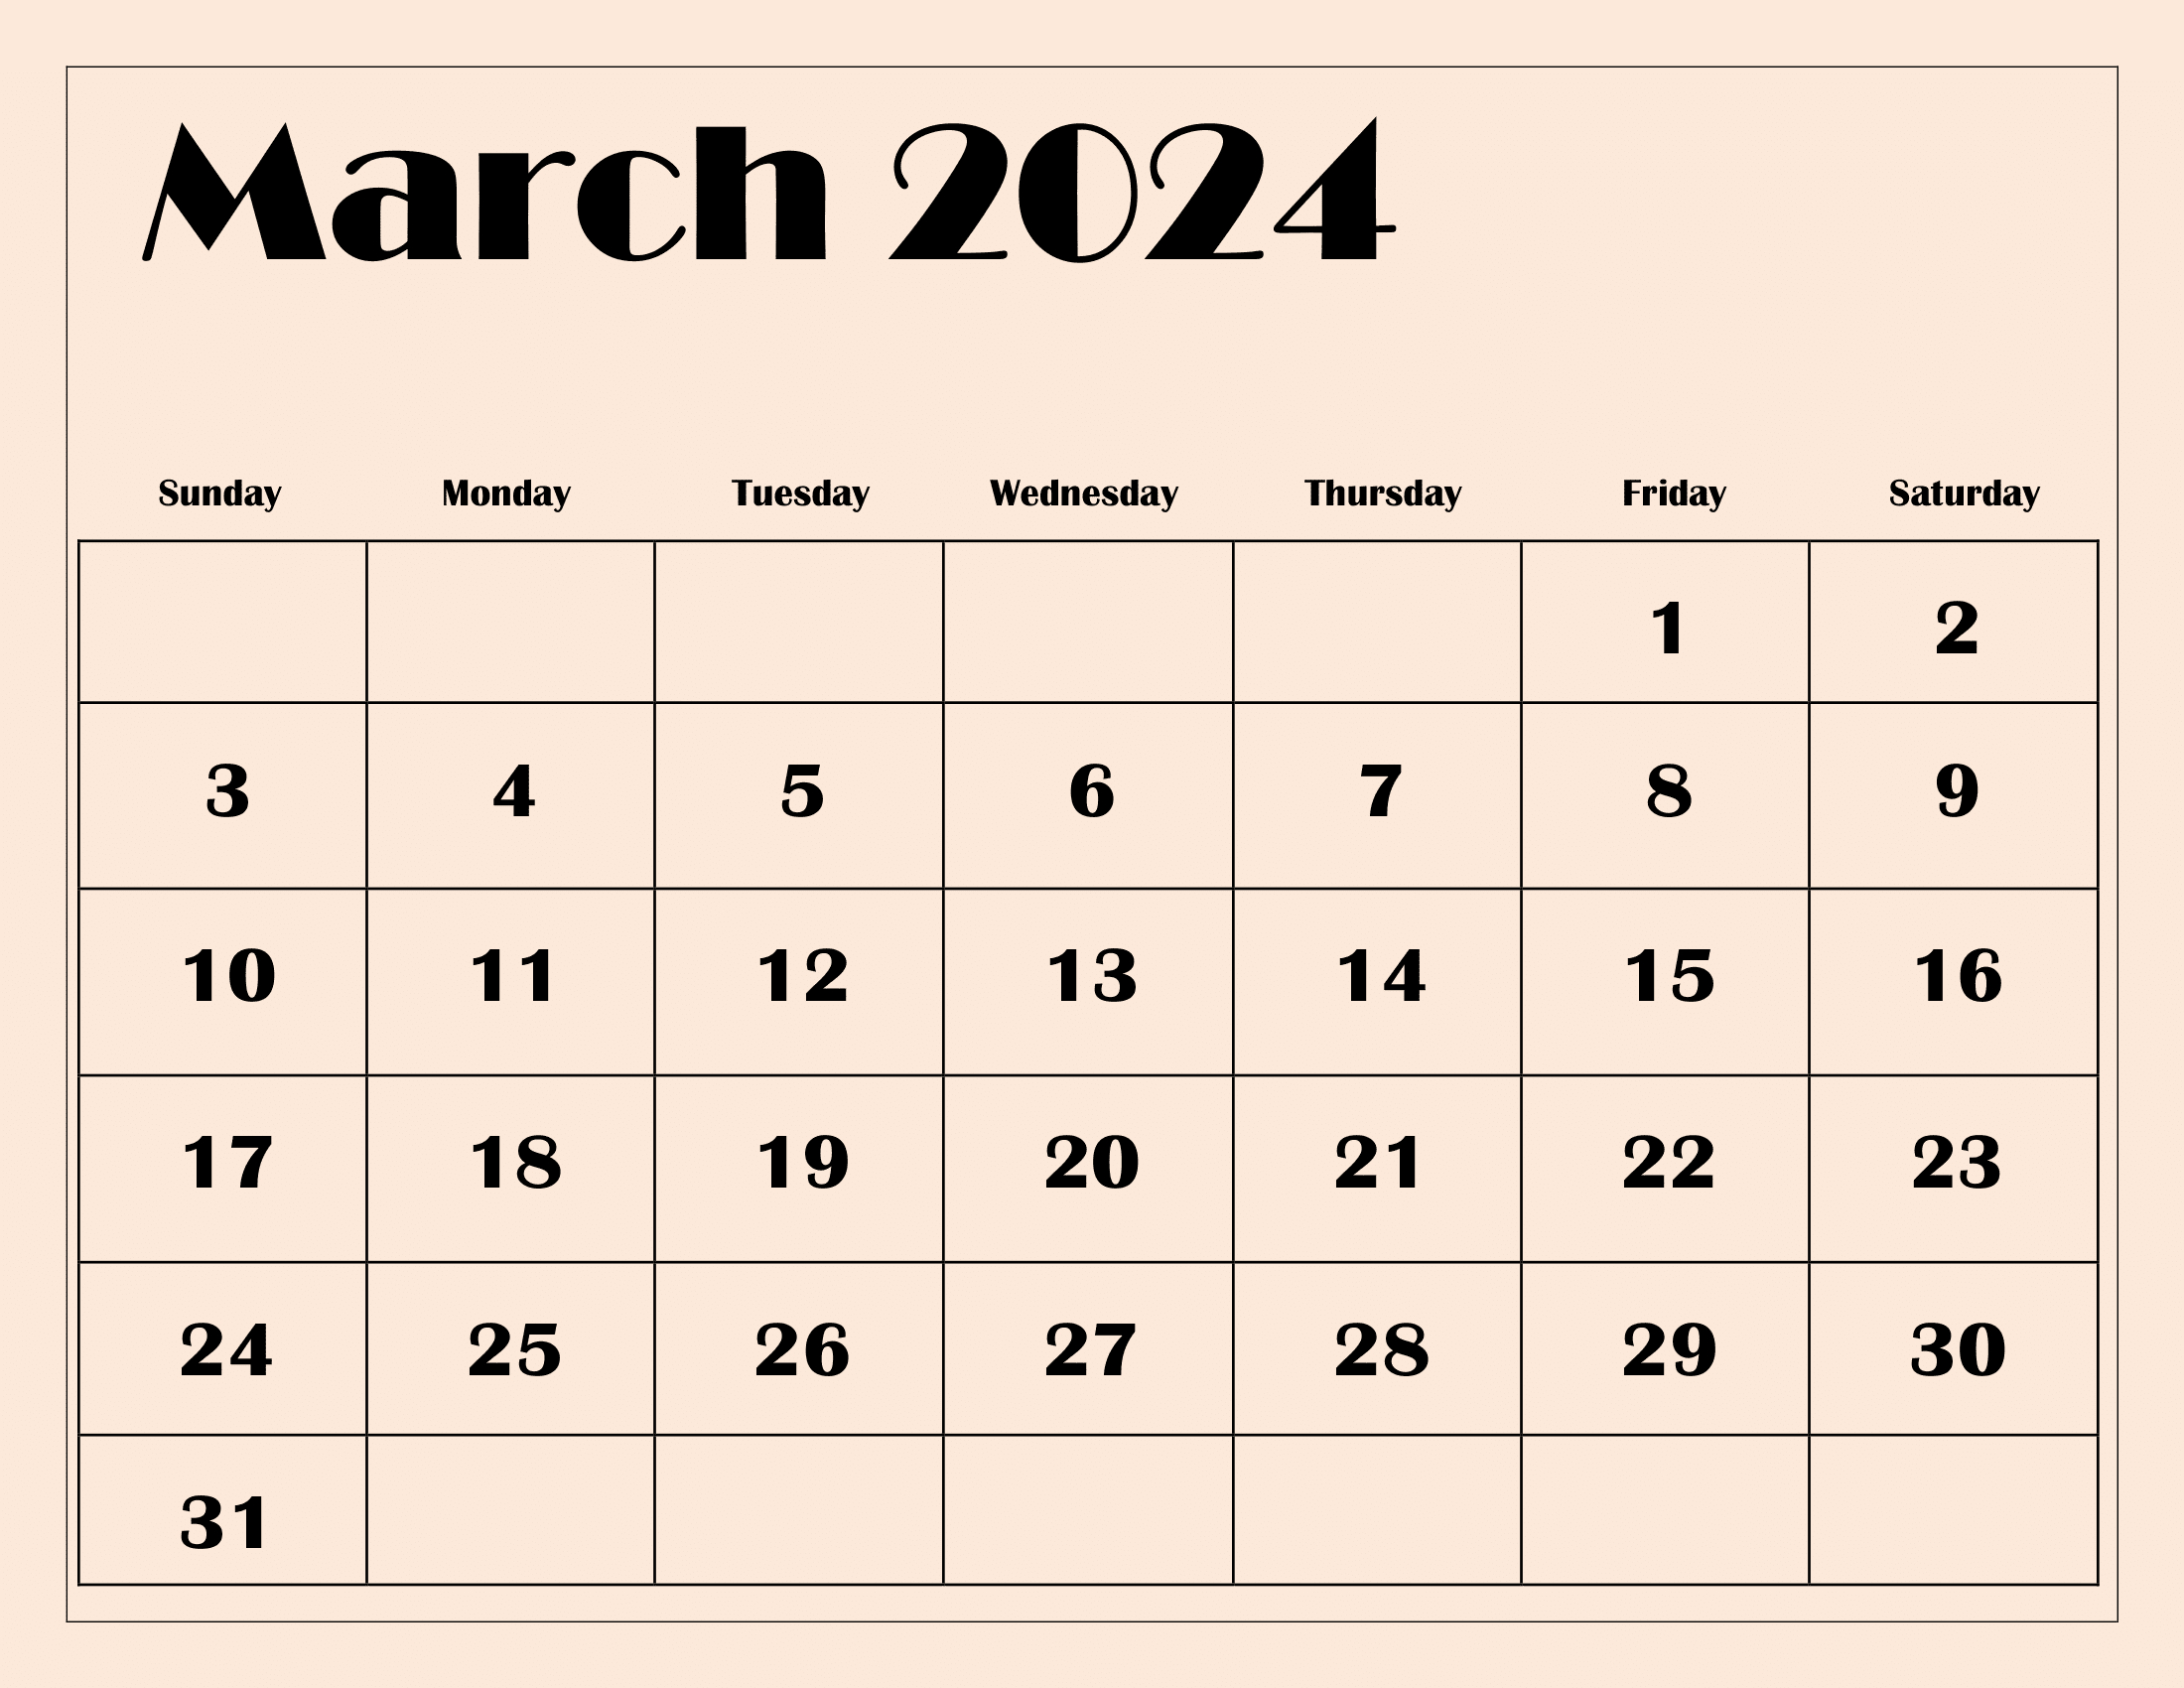 March 2024 Calendar Printable Pdf With Holidays Template Free with regard to Free Printable Blank March 2024 Calendar